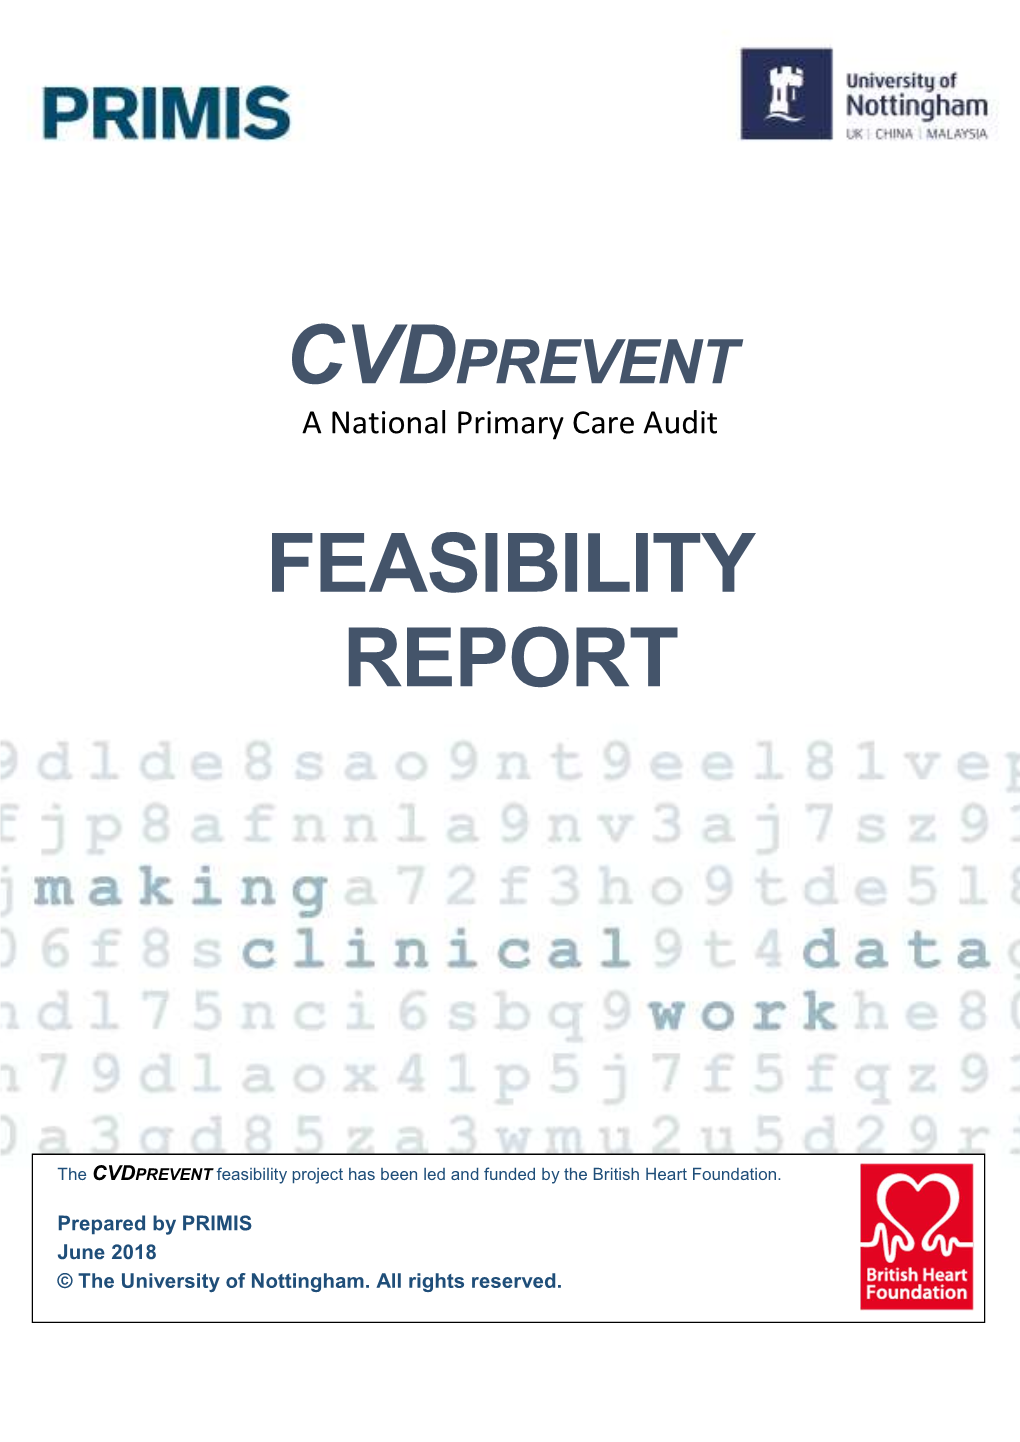 Download the Feasibility Report